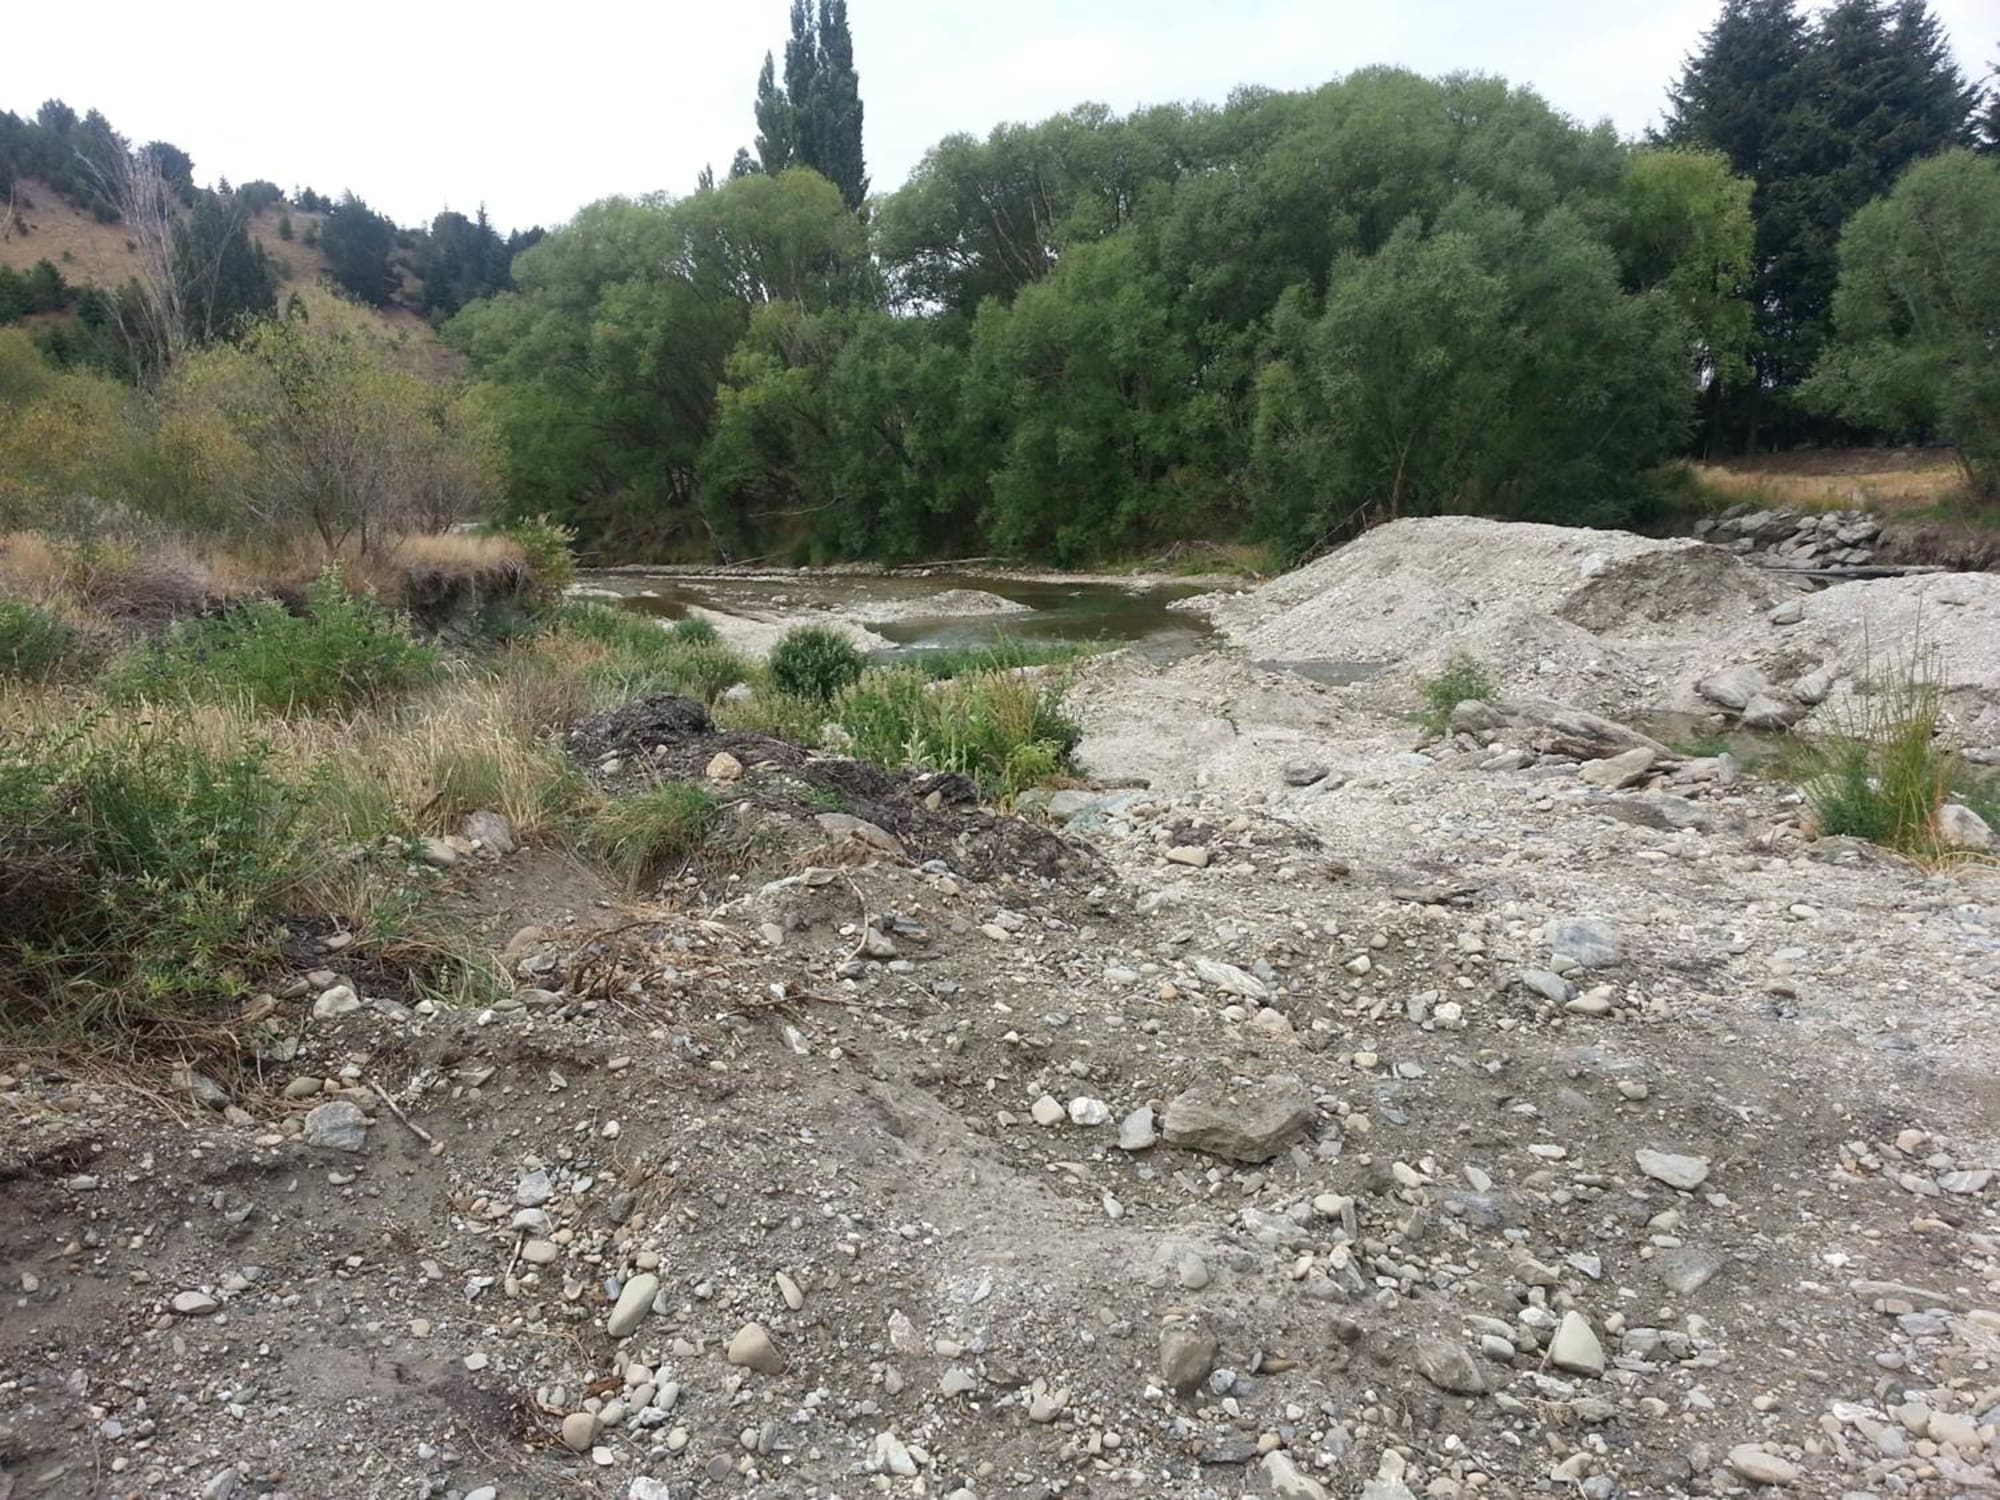 Rubble of a dry rive bed with brown water in the background